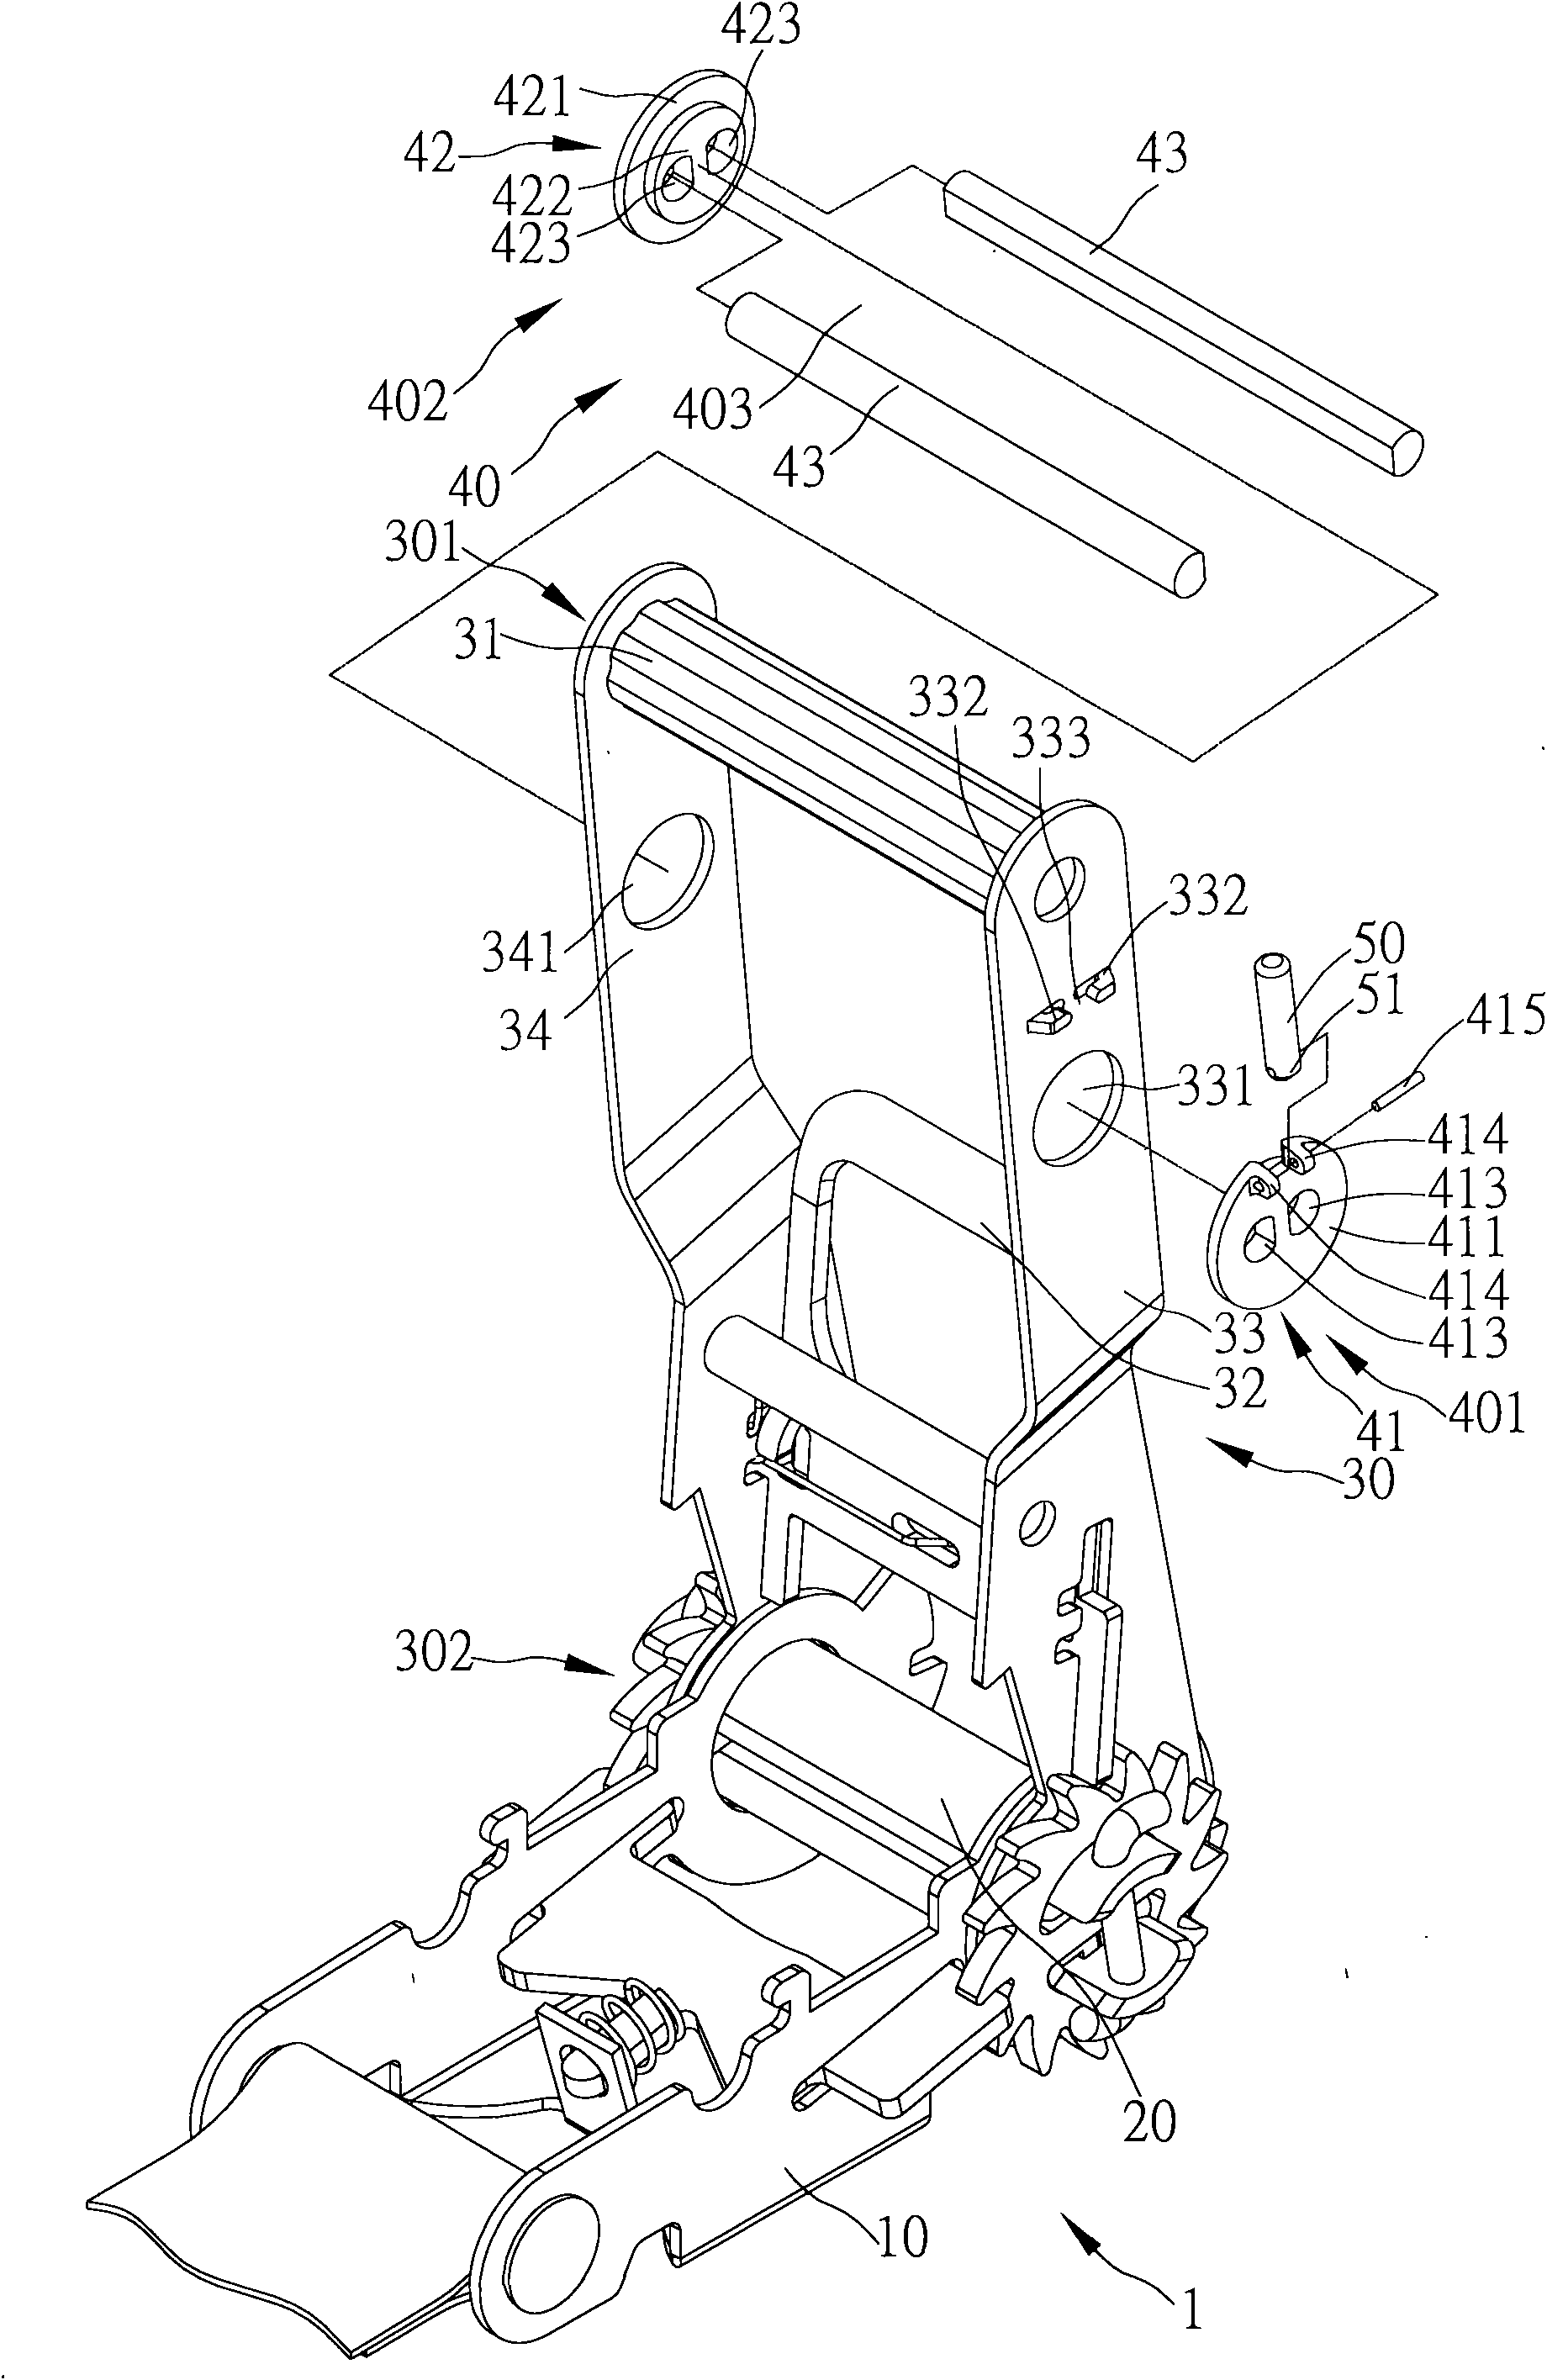 Manual puller with residual band winder